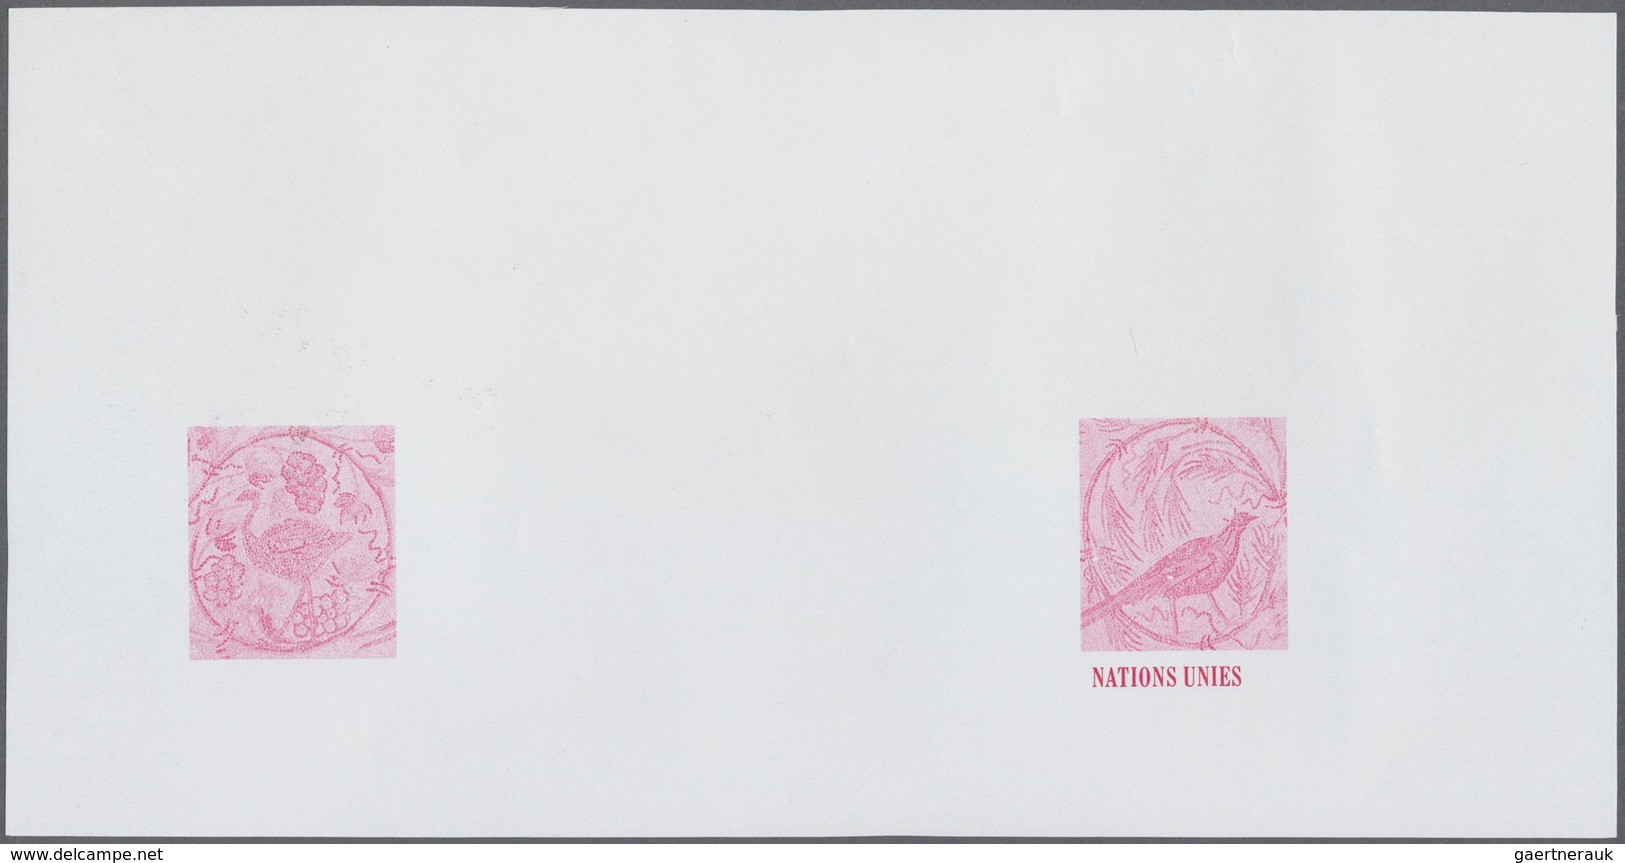 Vereinte Nationen - New York: 1969, collective, progressive proofs (9 phases) for the issue "Art at